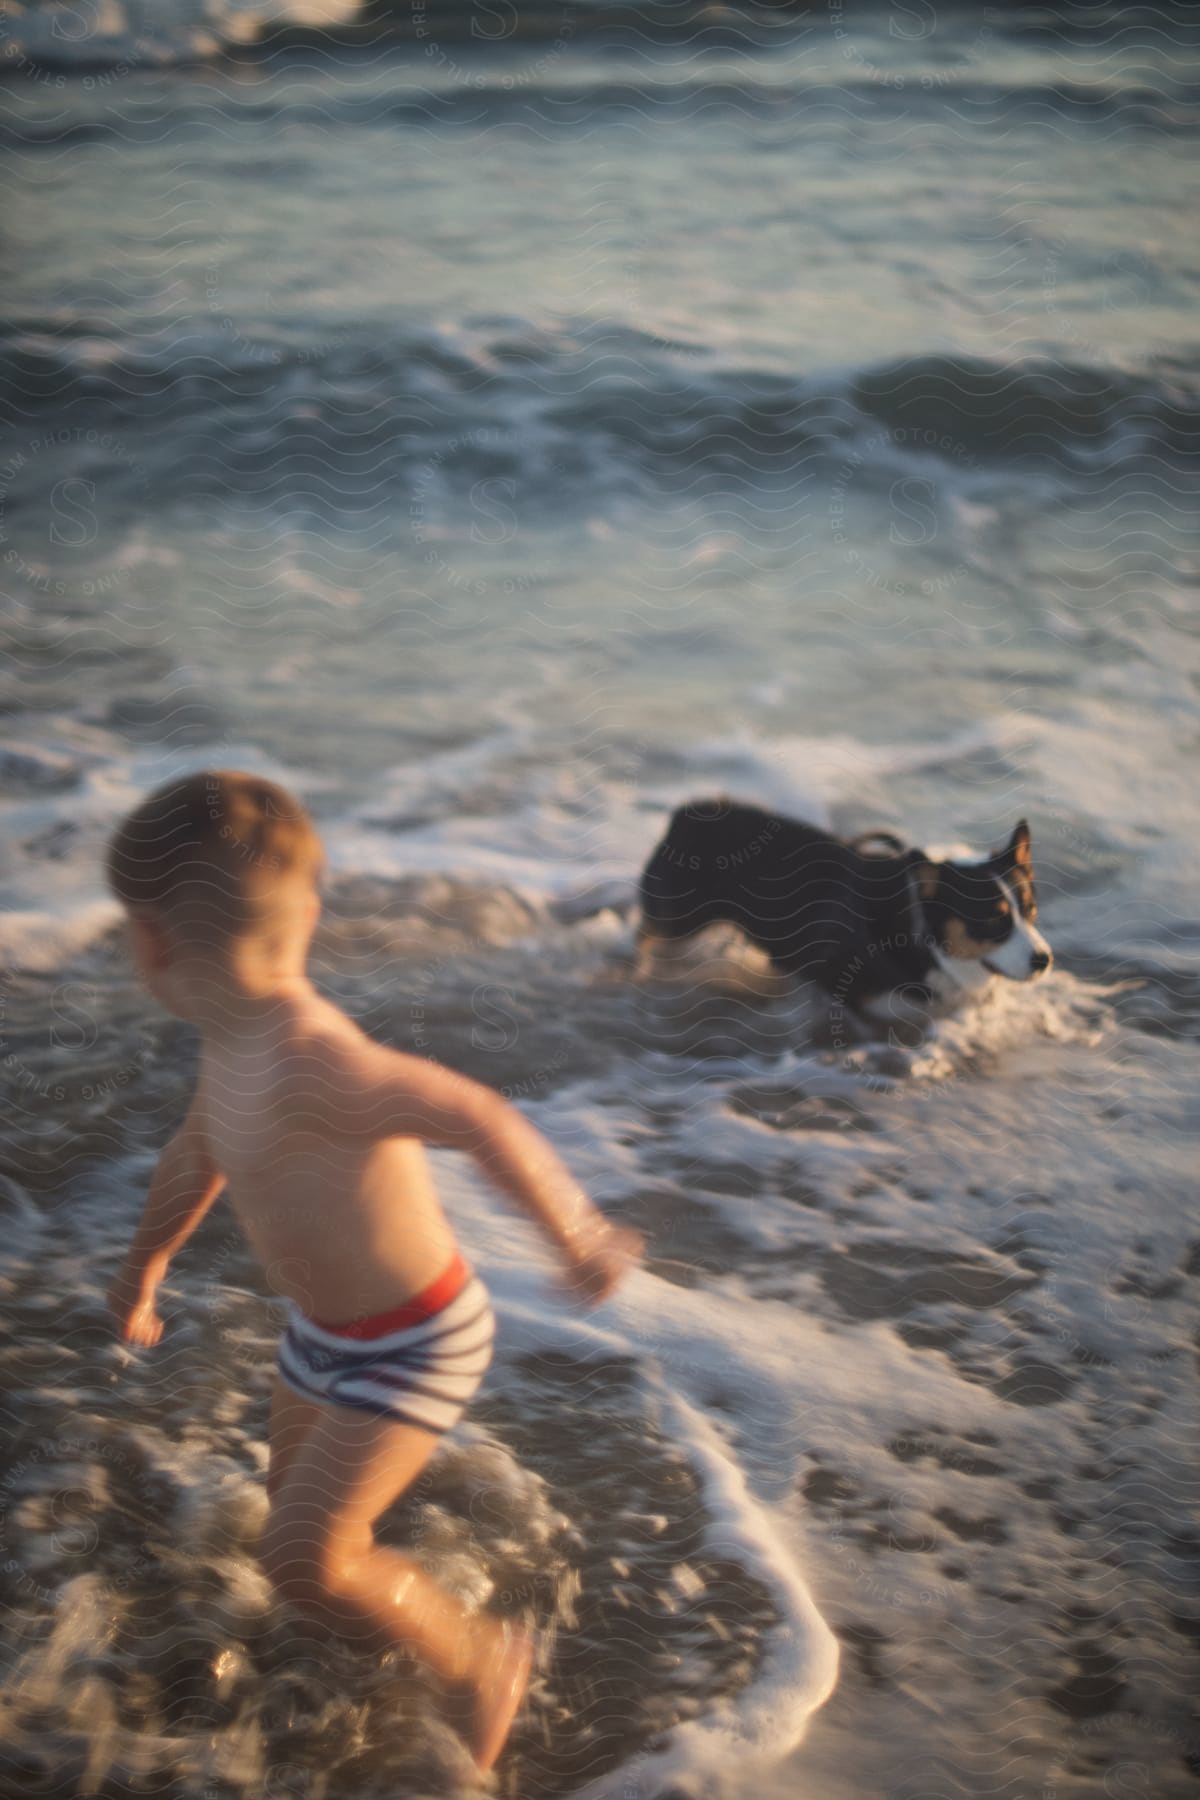 Dog chases a young boy through shallow waves at the beach.